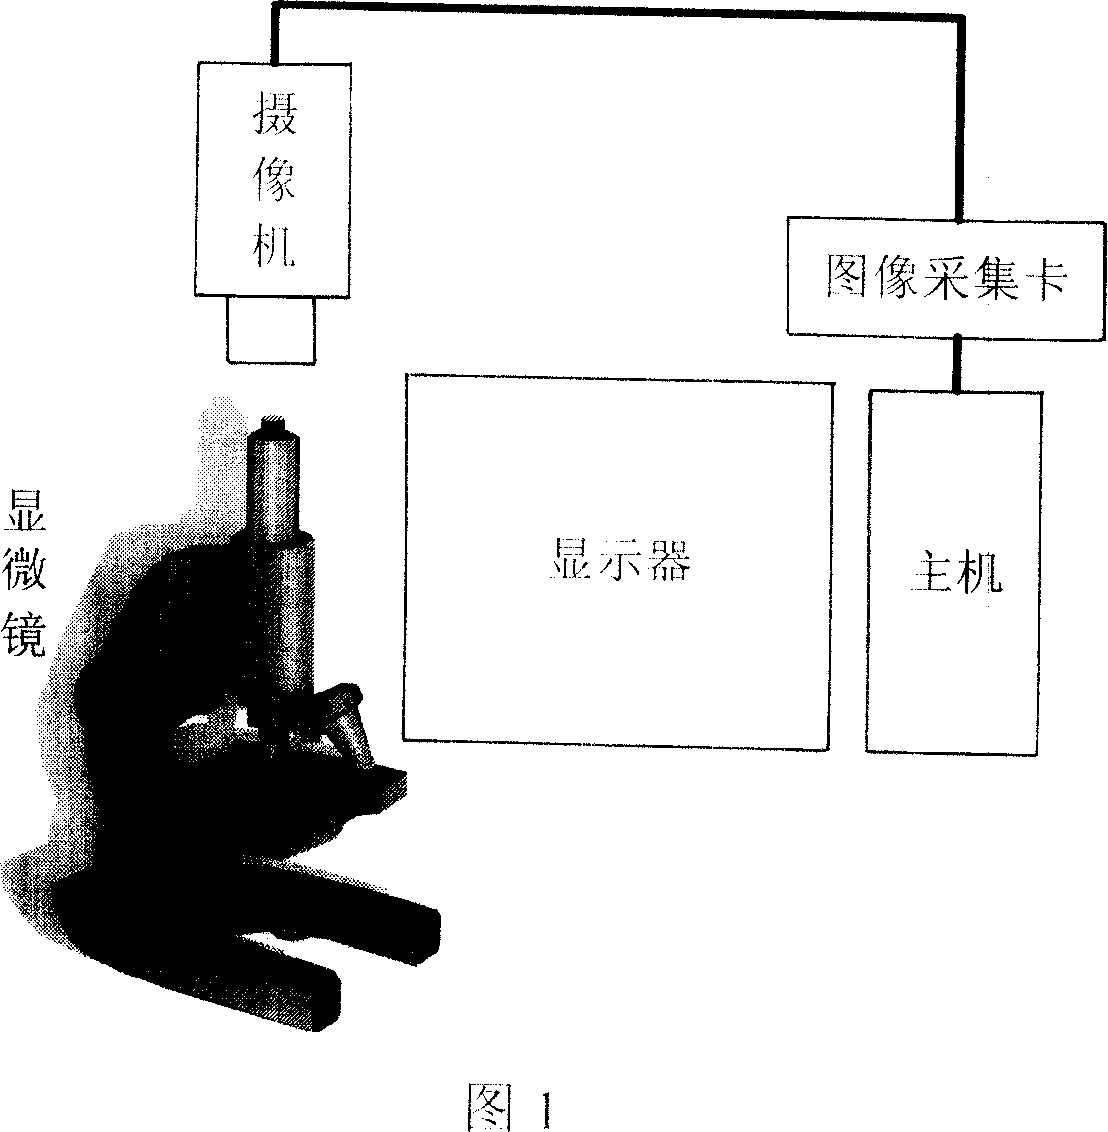 Method for measuring reflectivity of mineral and composition of mineral phase